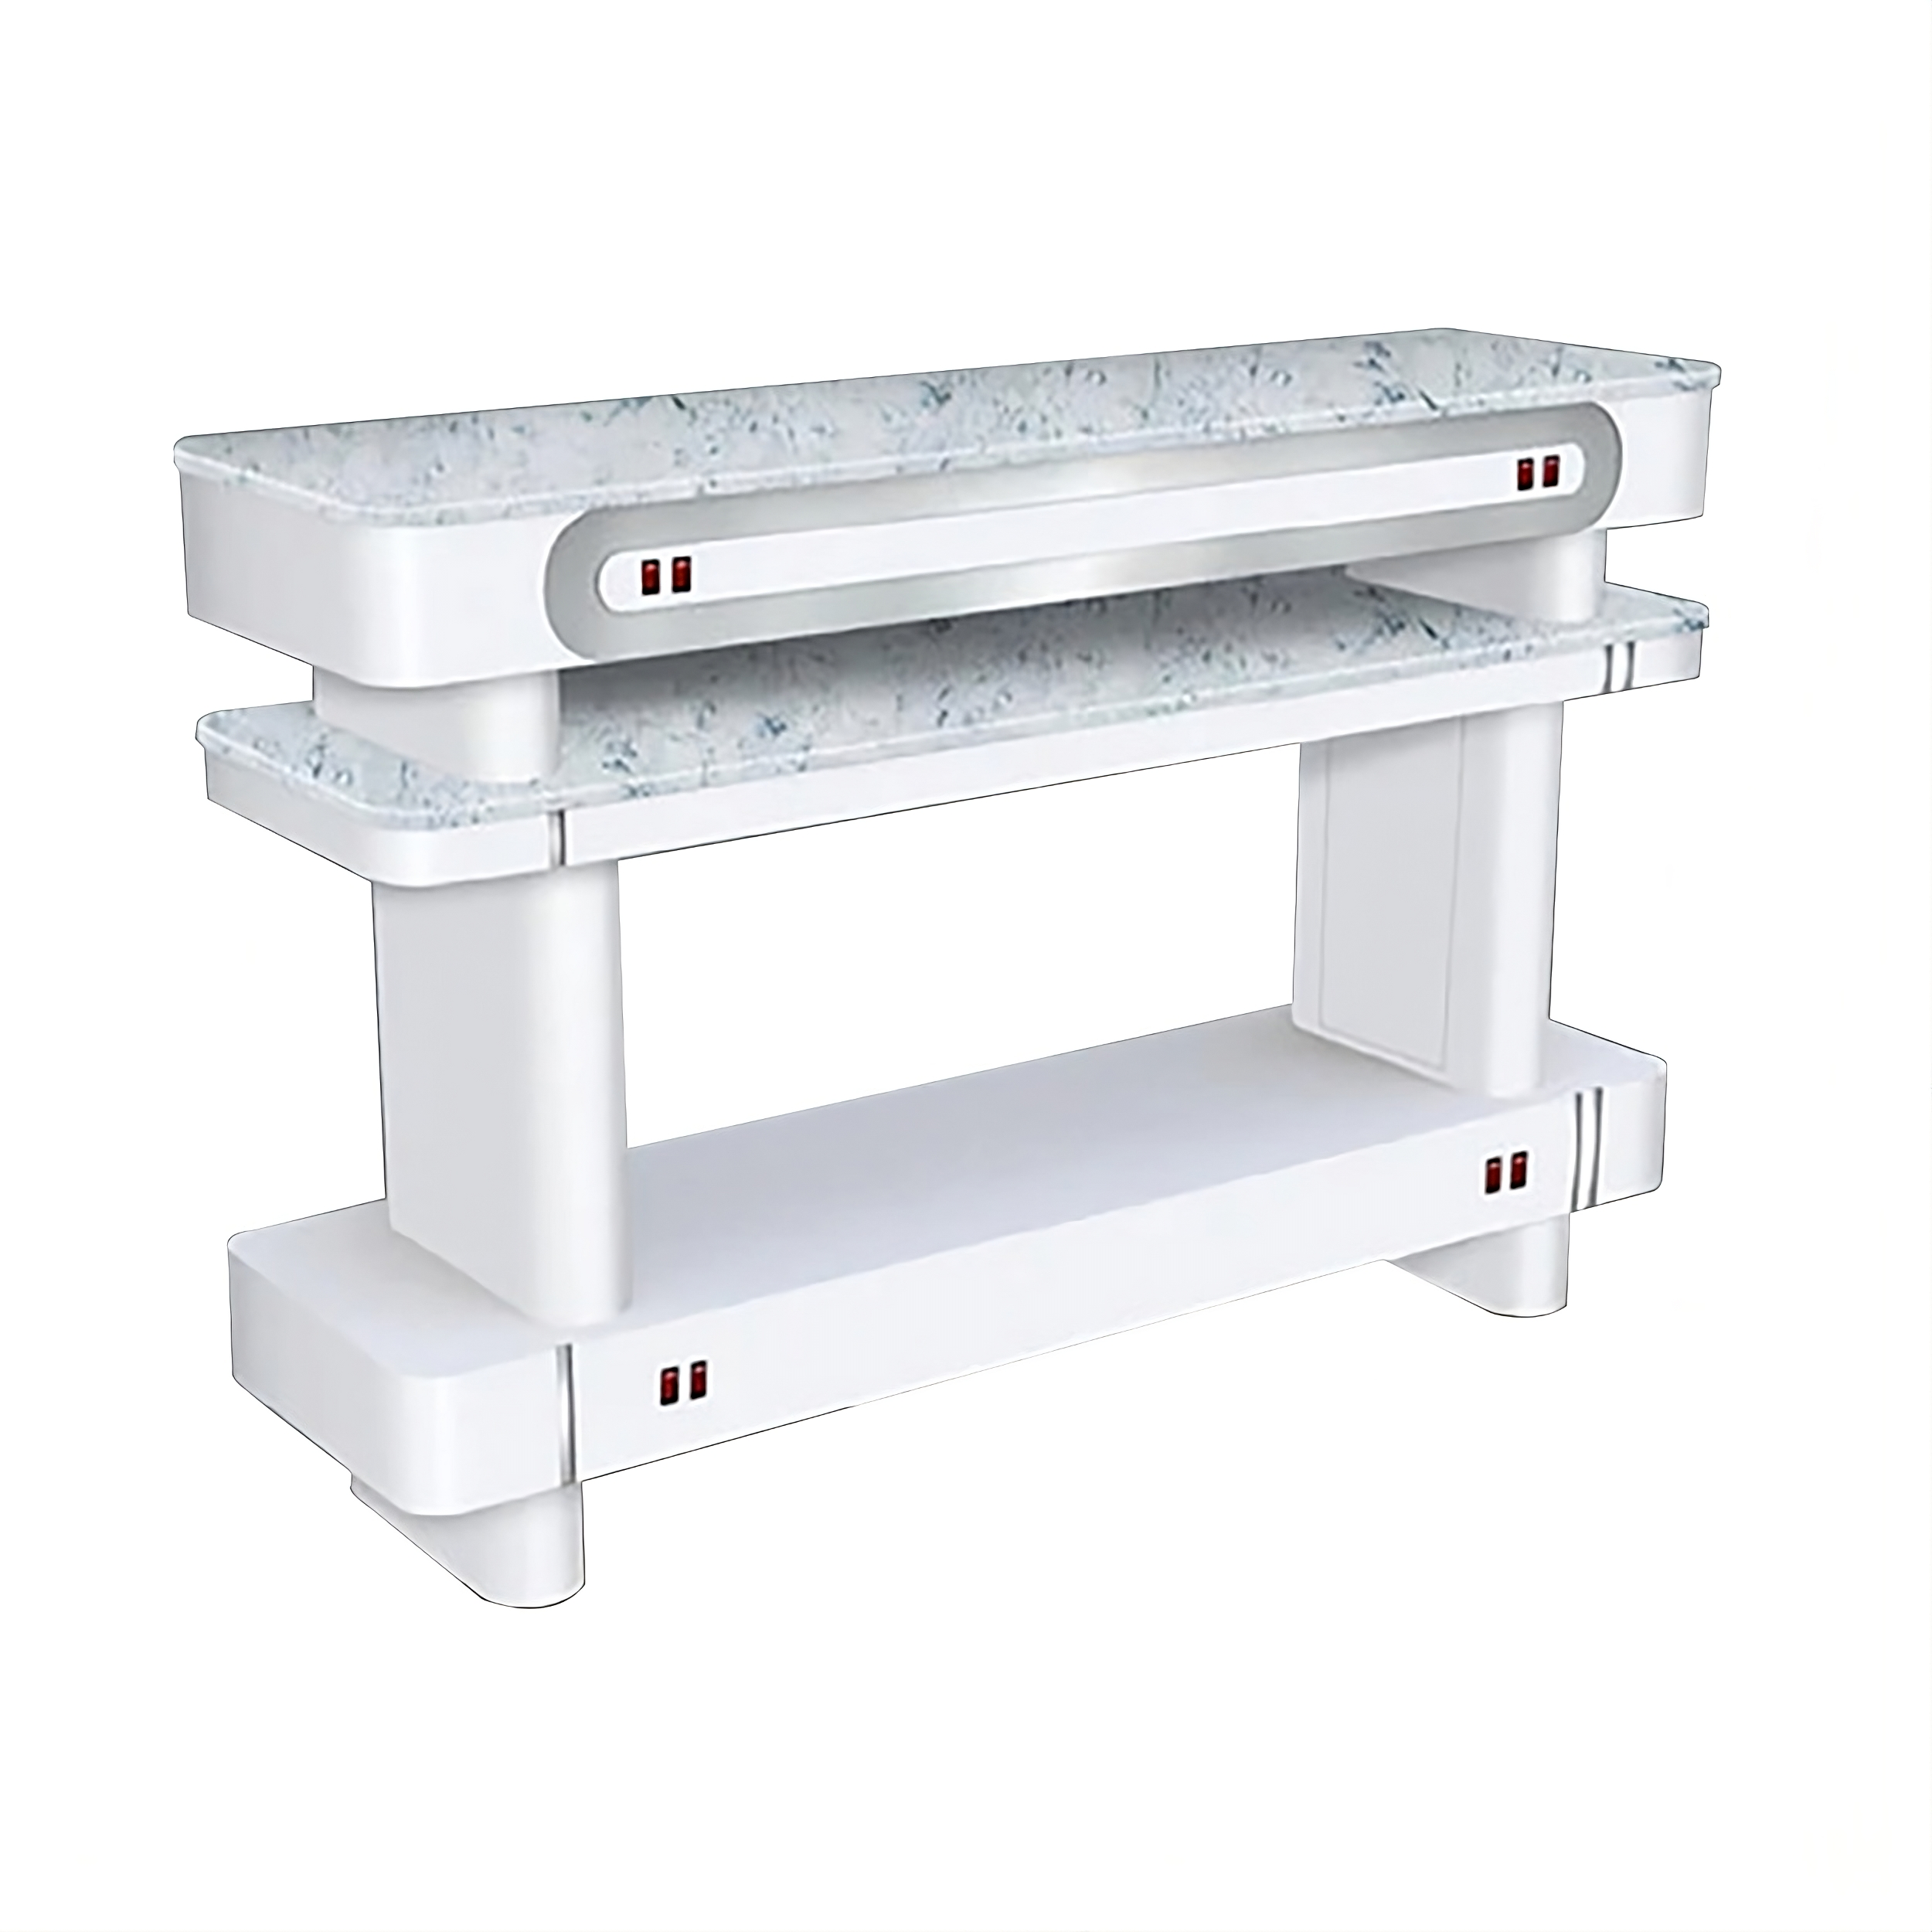 4-Seat Nail Dryer Table with Solid Surface Countertop - White & Silver